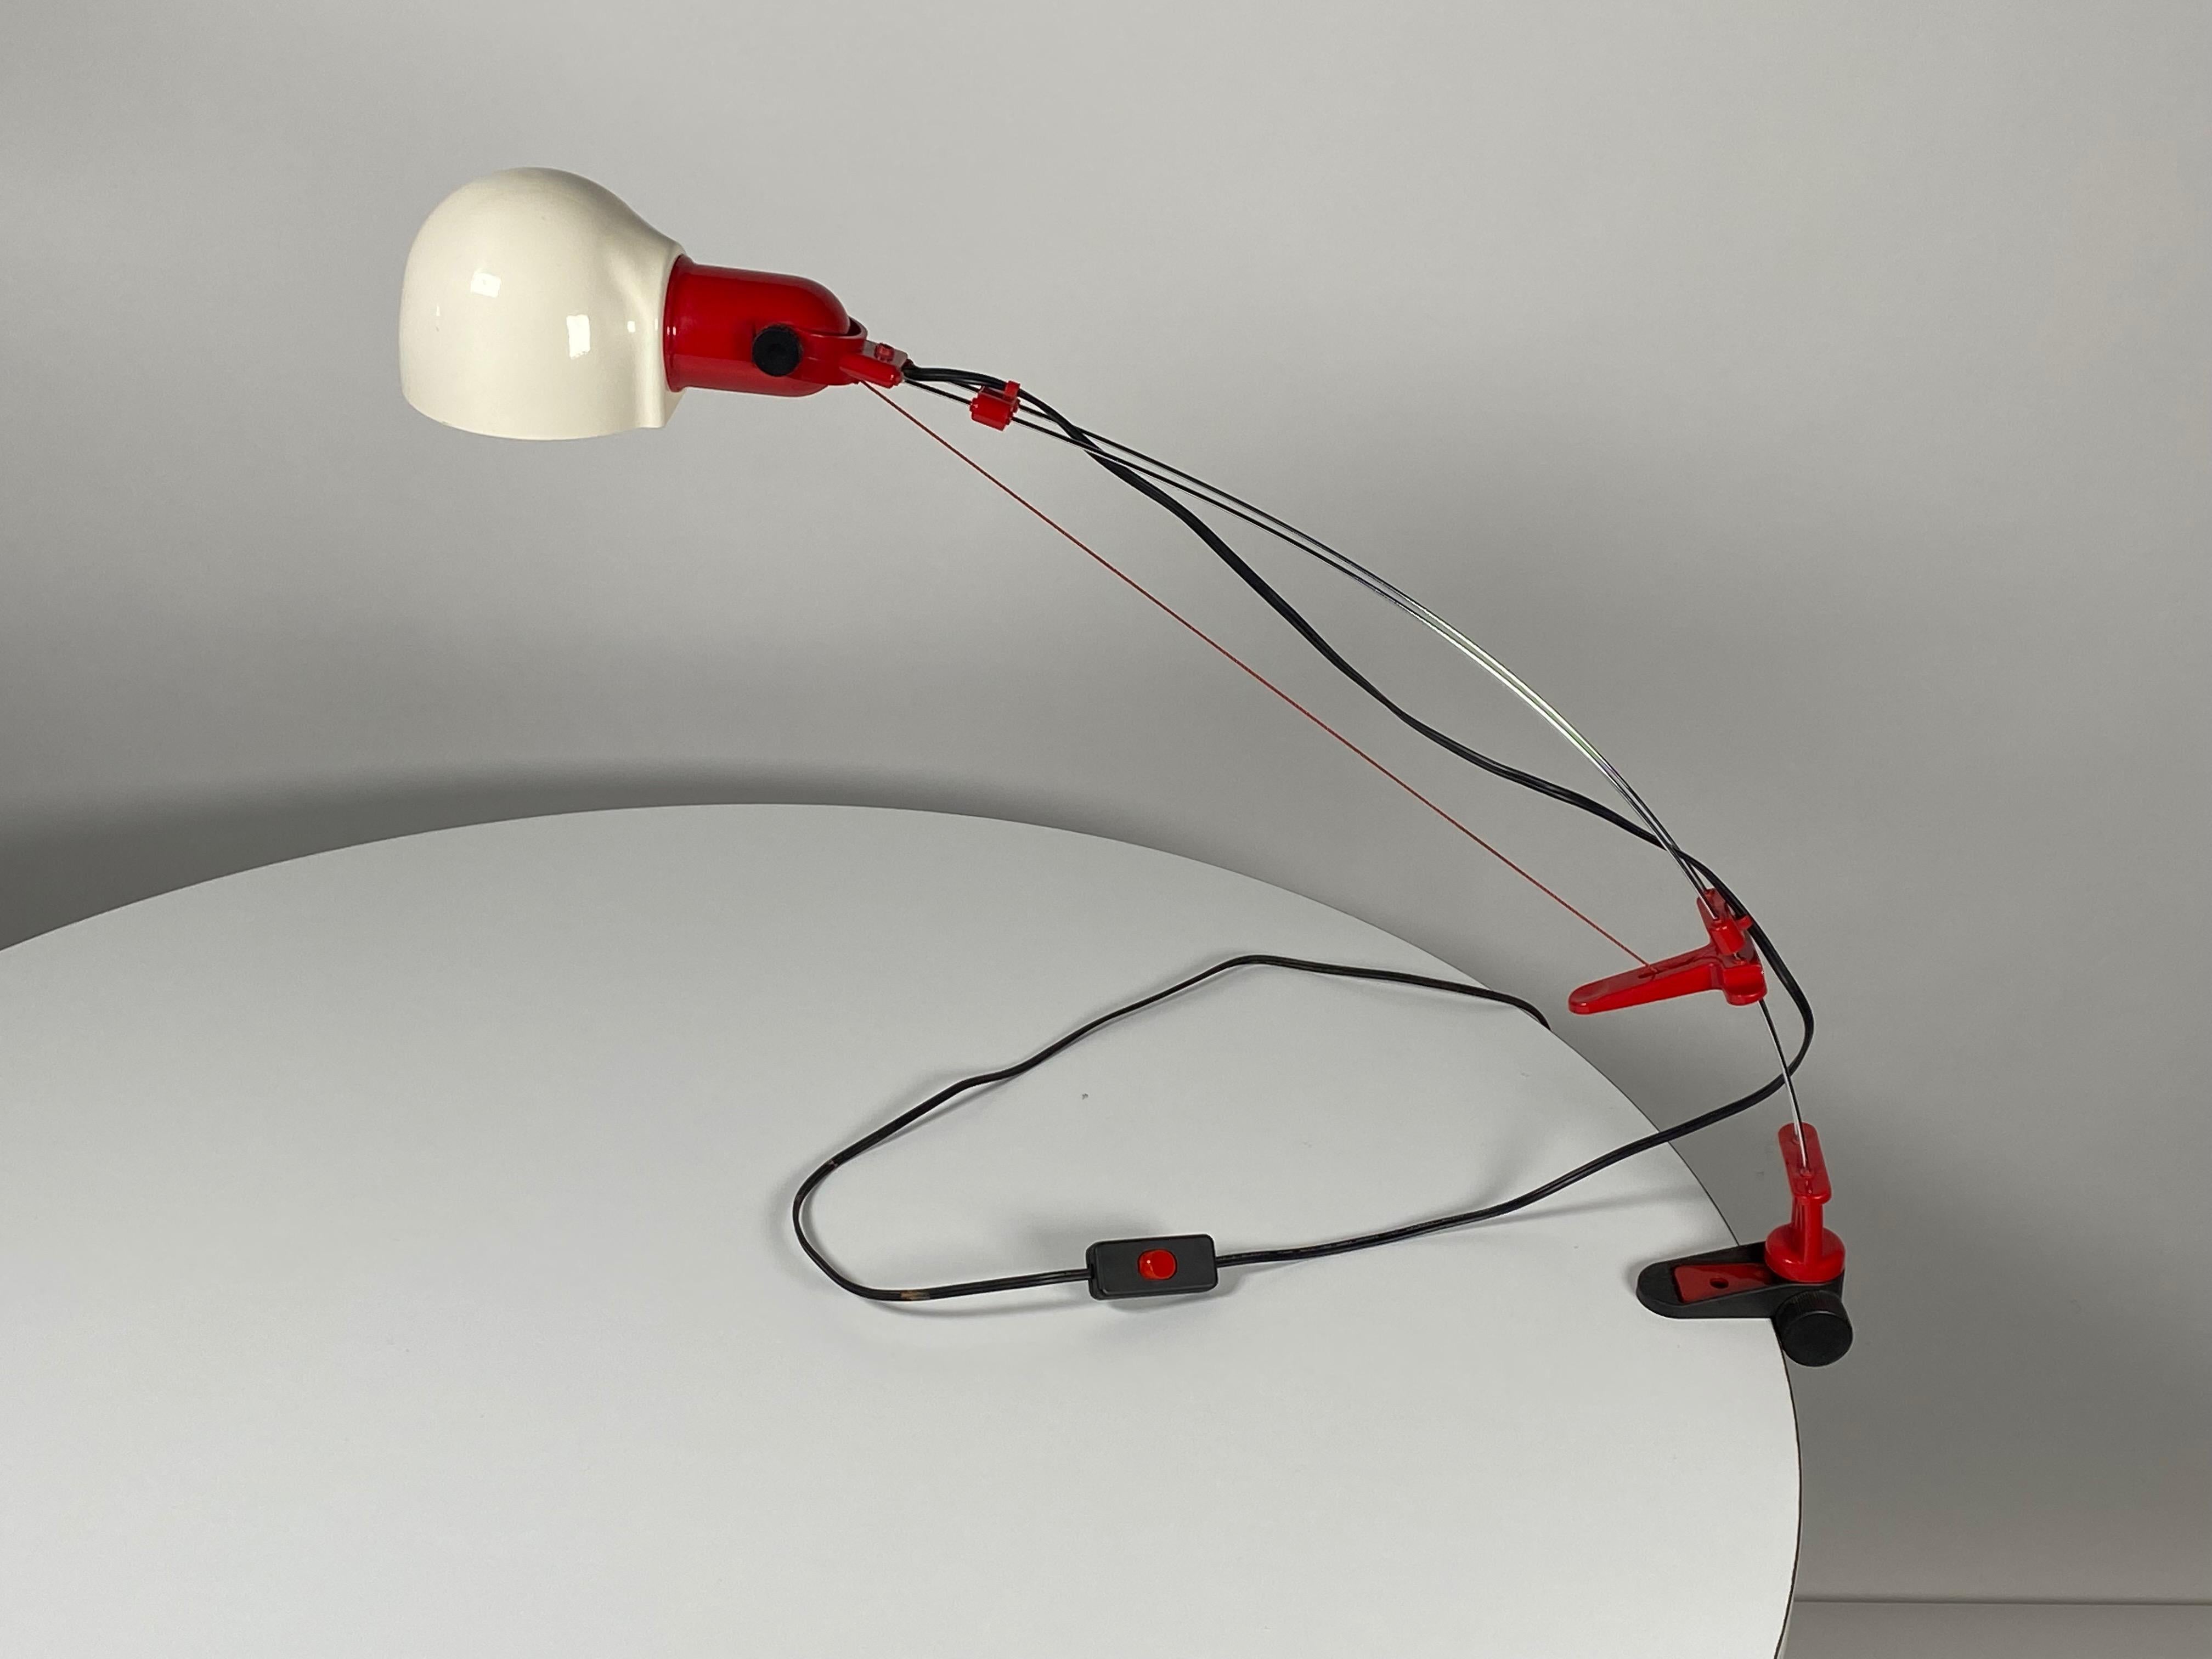 Post Modern design in this clamp desk lamp chromed wire architecture with a cord tension for adjusting the height. Constructed of red and white plastic, the shade also adjusts which can be turned for light direction.